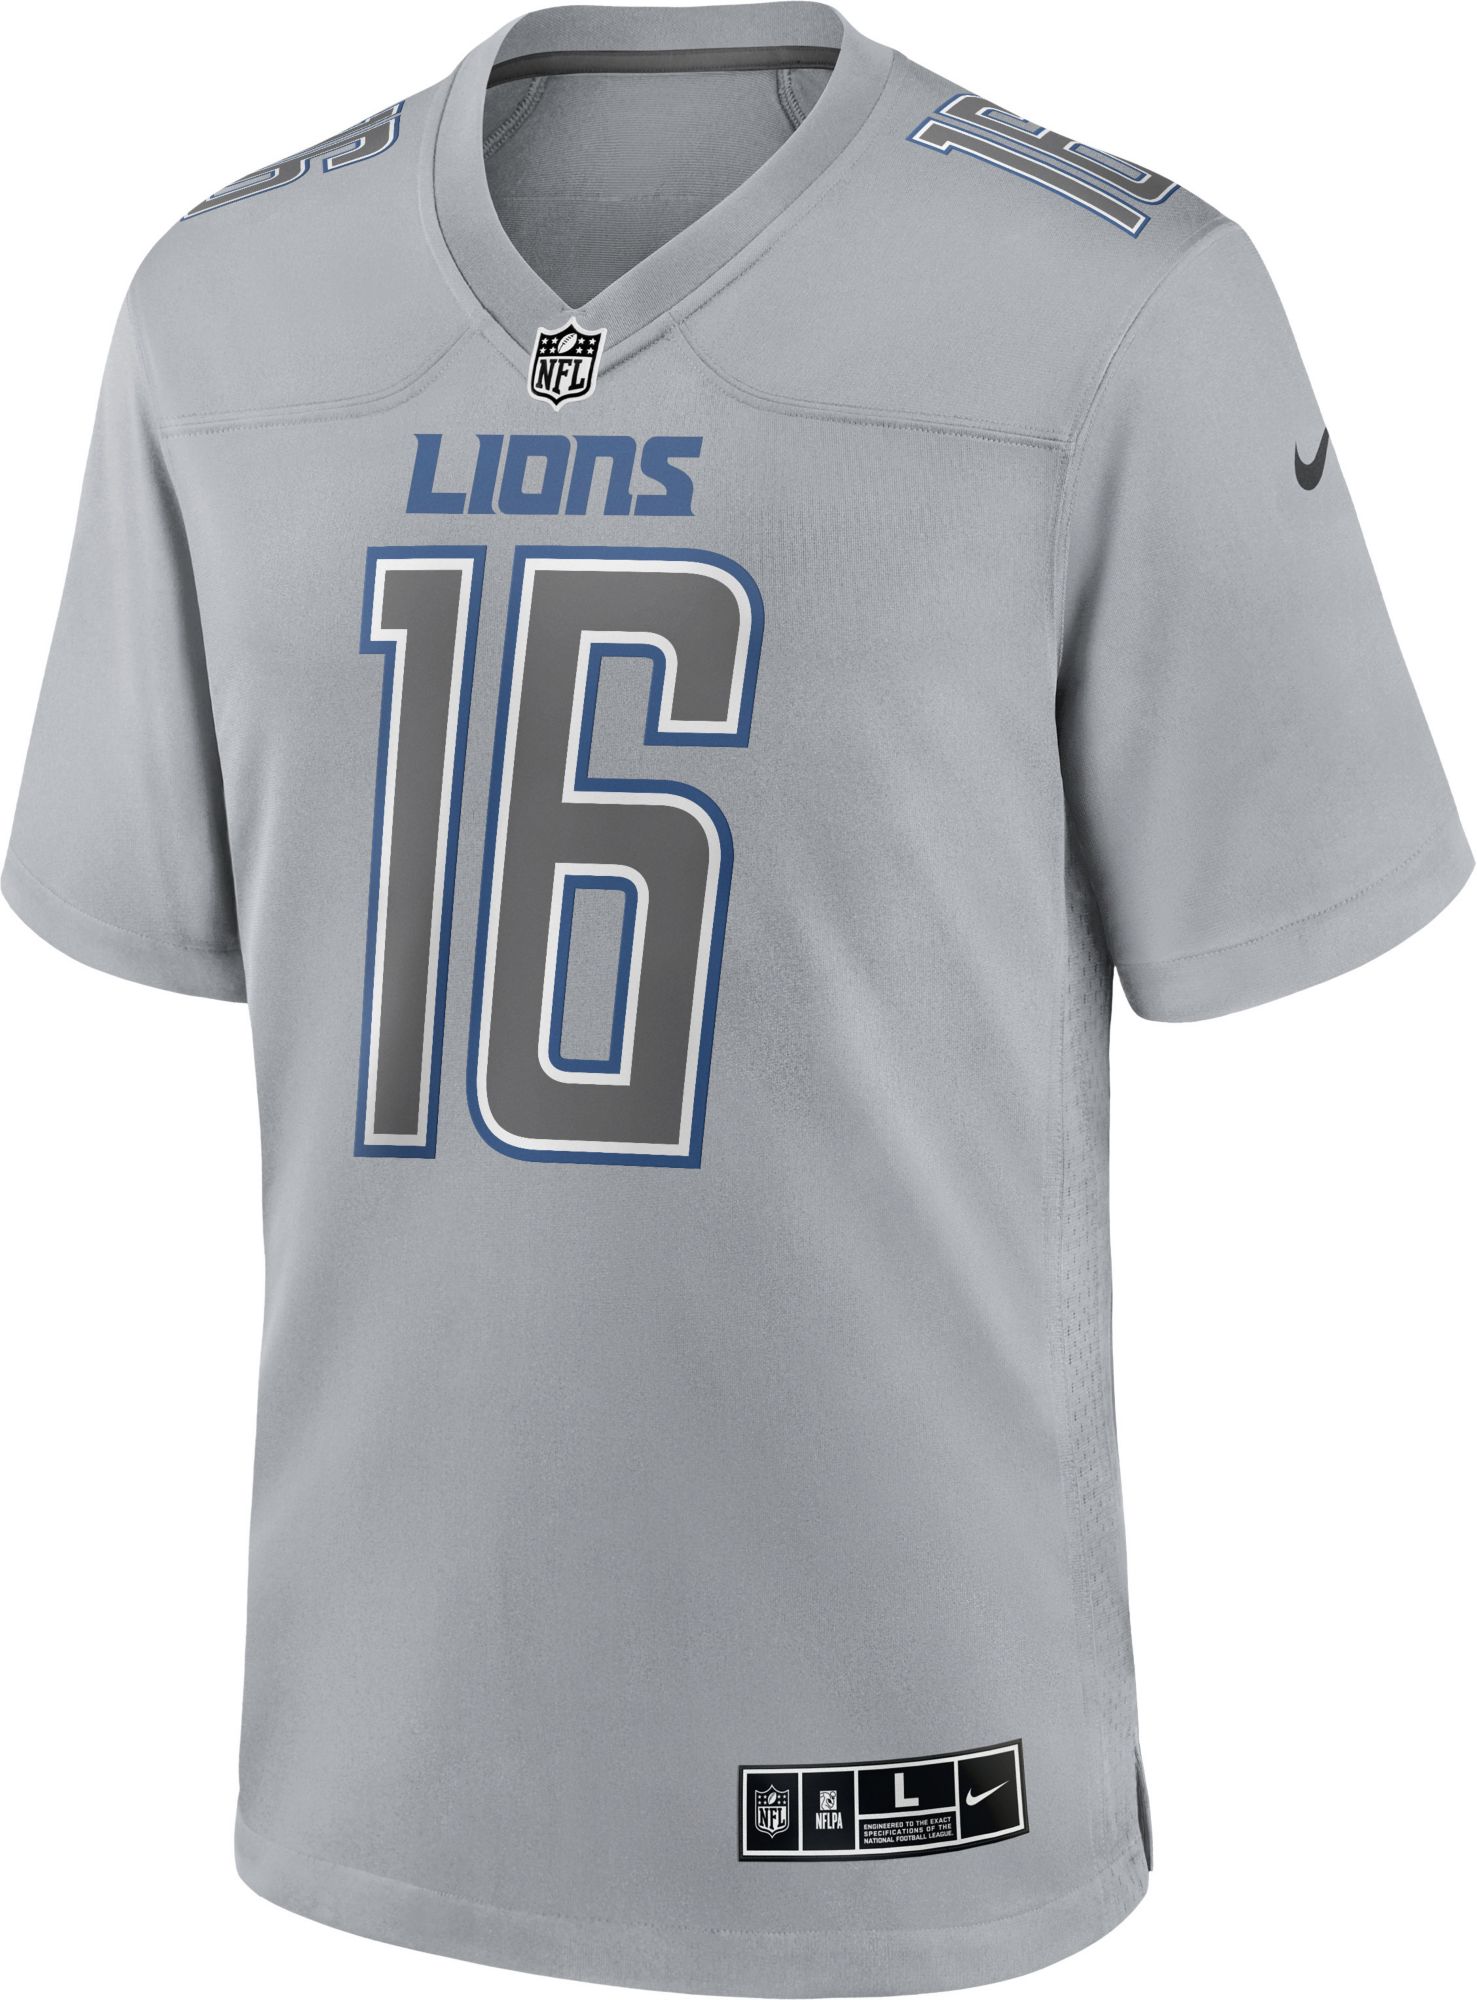 Detroit Lions No16 Jared Goff Men's Nike Multi-Color 2020 Crucial Catch Jersey Greyheather